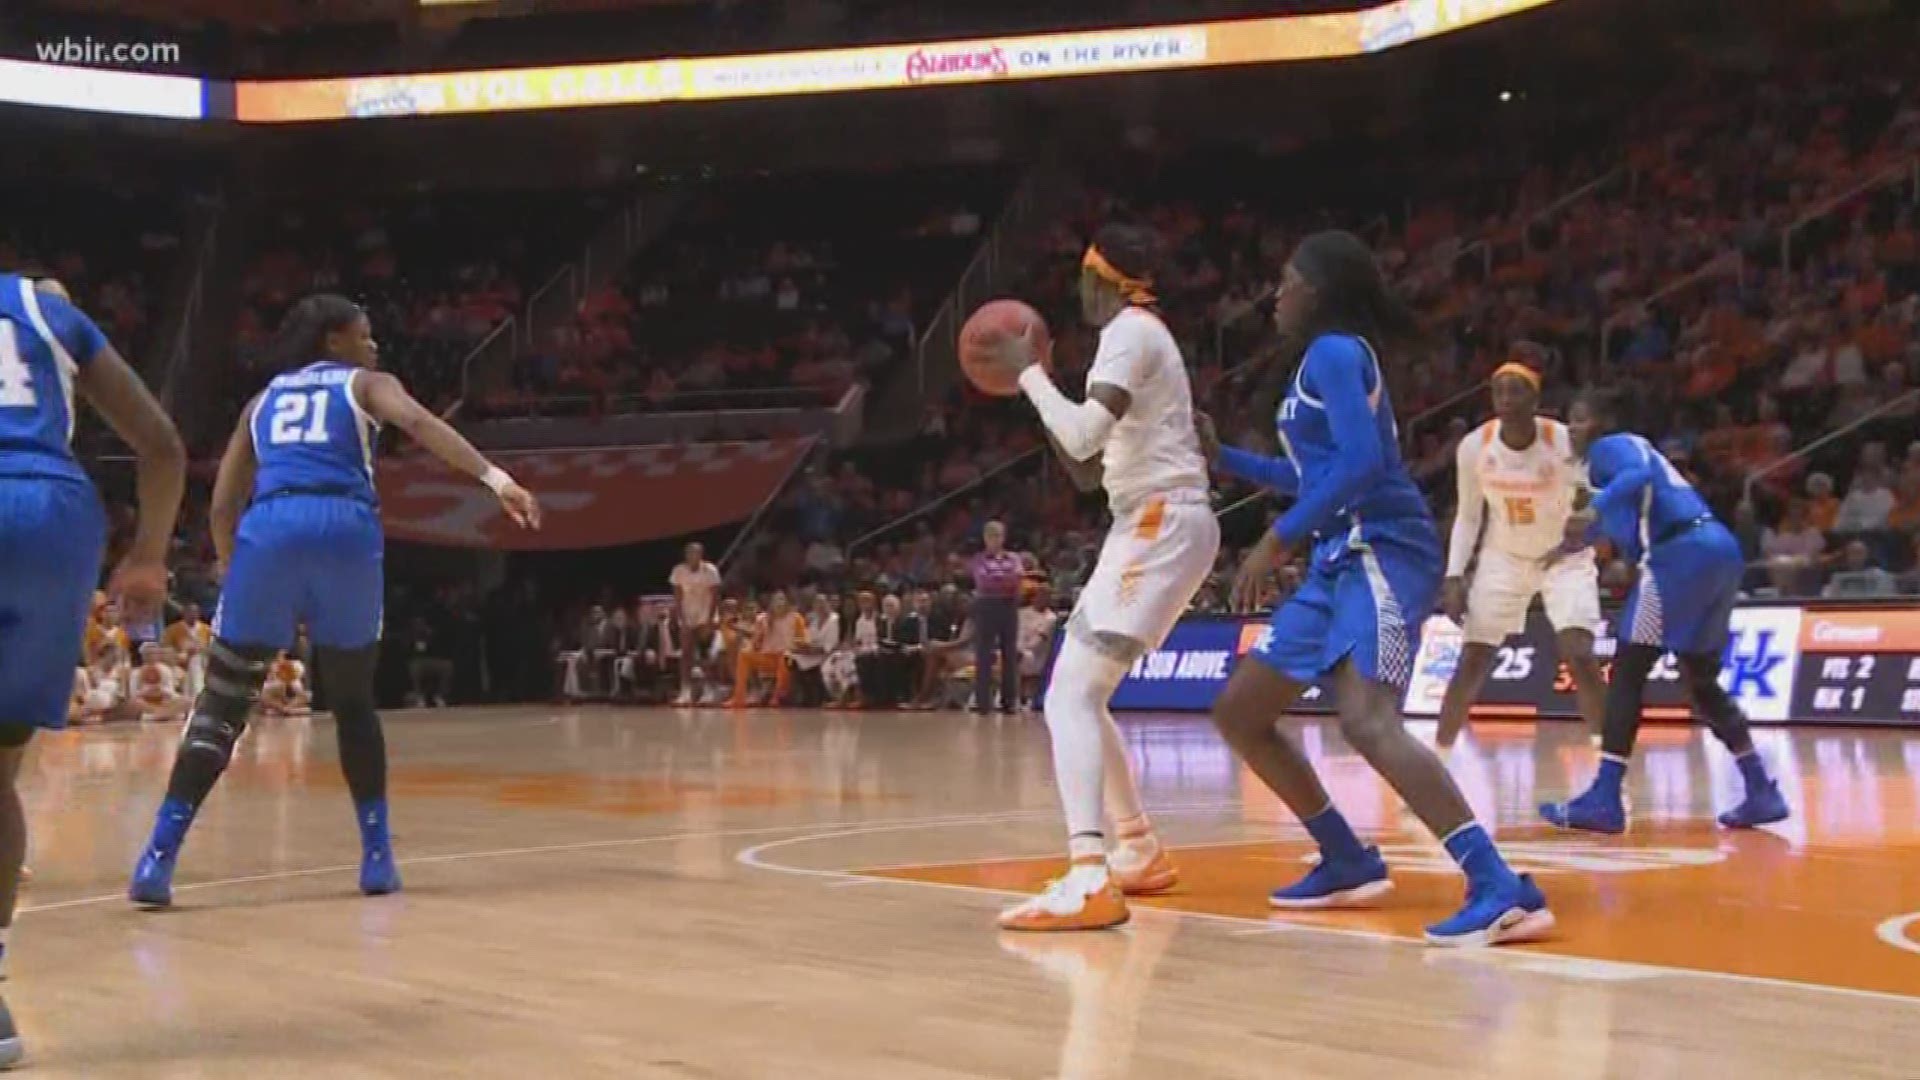 The Lady Vols have lost four straight. That's the program's longest skid in the NCAA era. How bad is it and what's going wrong?